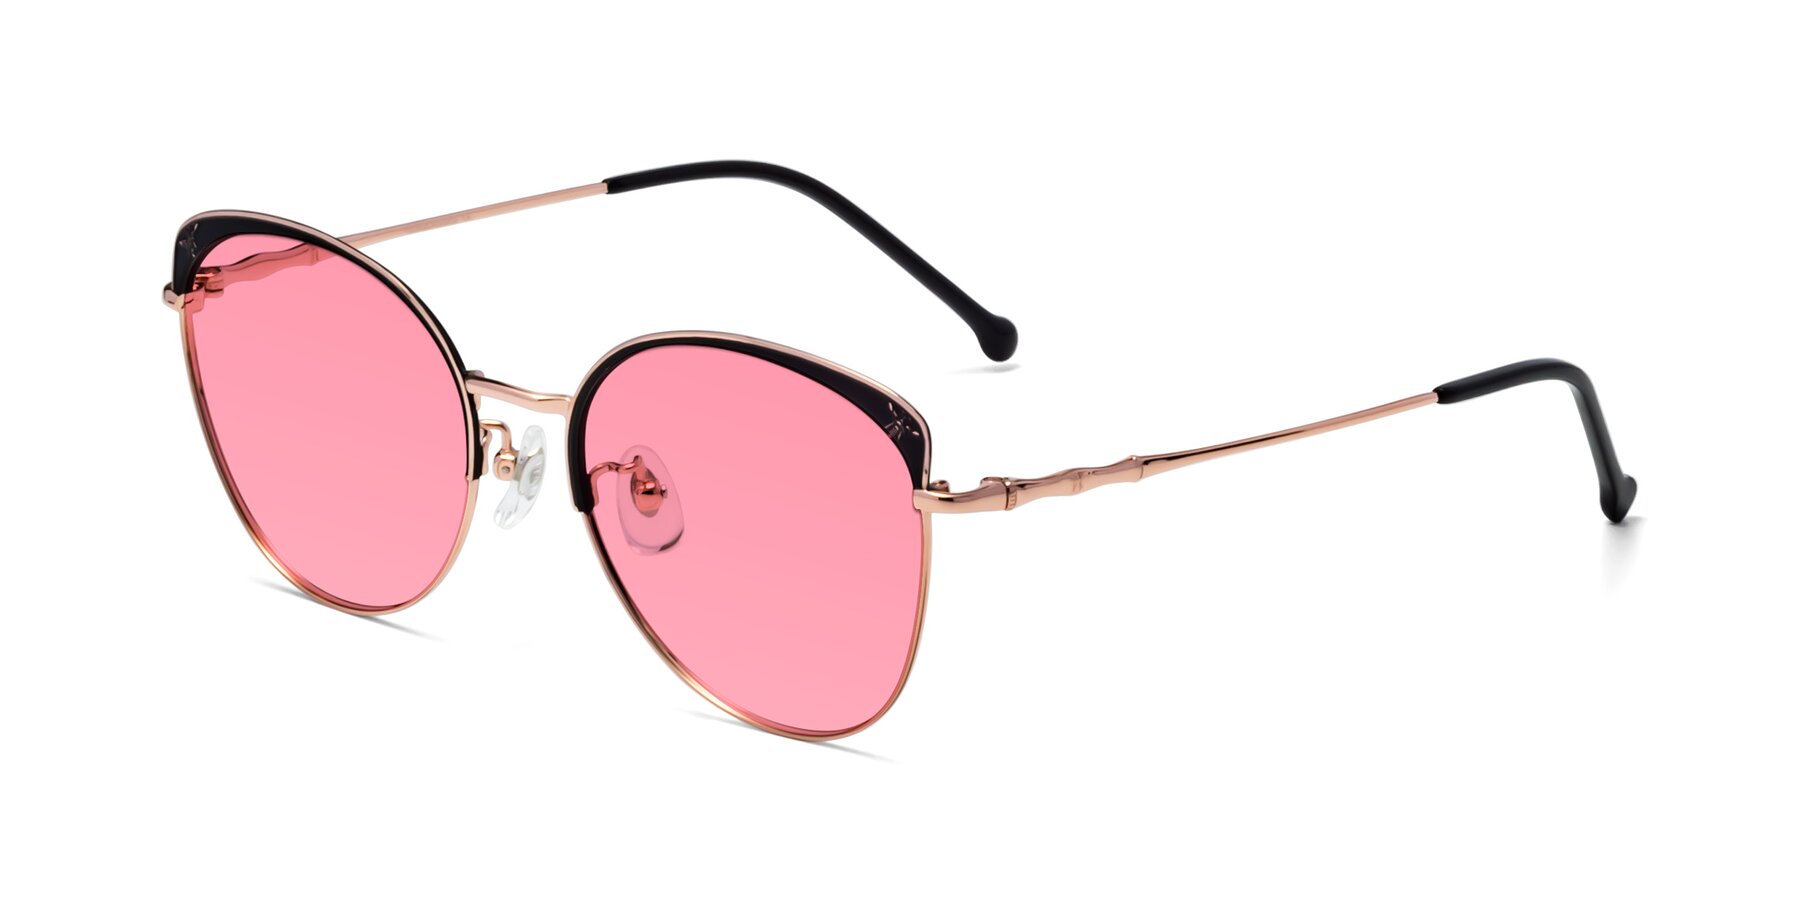 Angle of 18019 in Black-Rose Gold with Pink Tinted Lenses